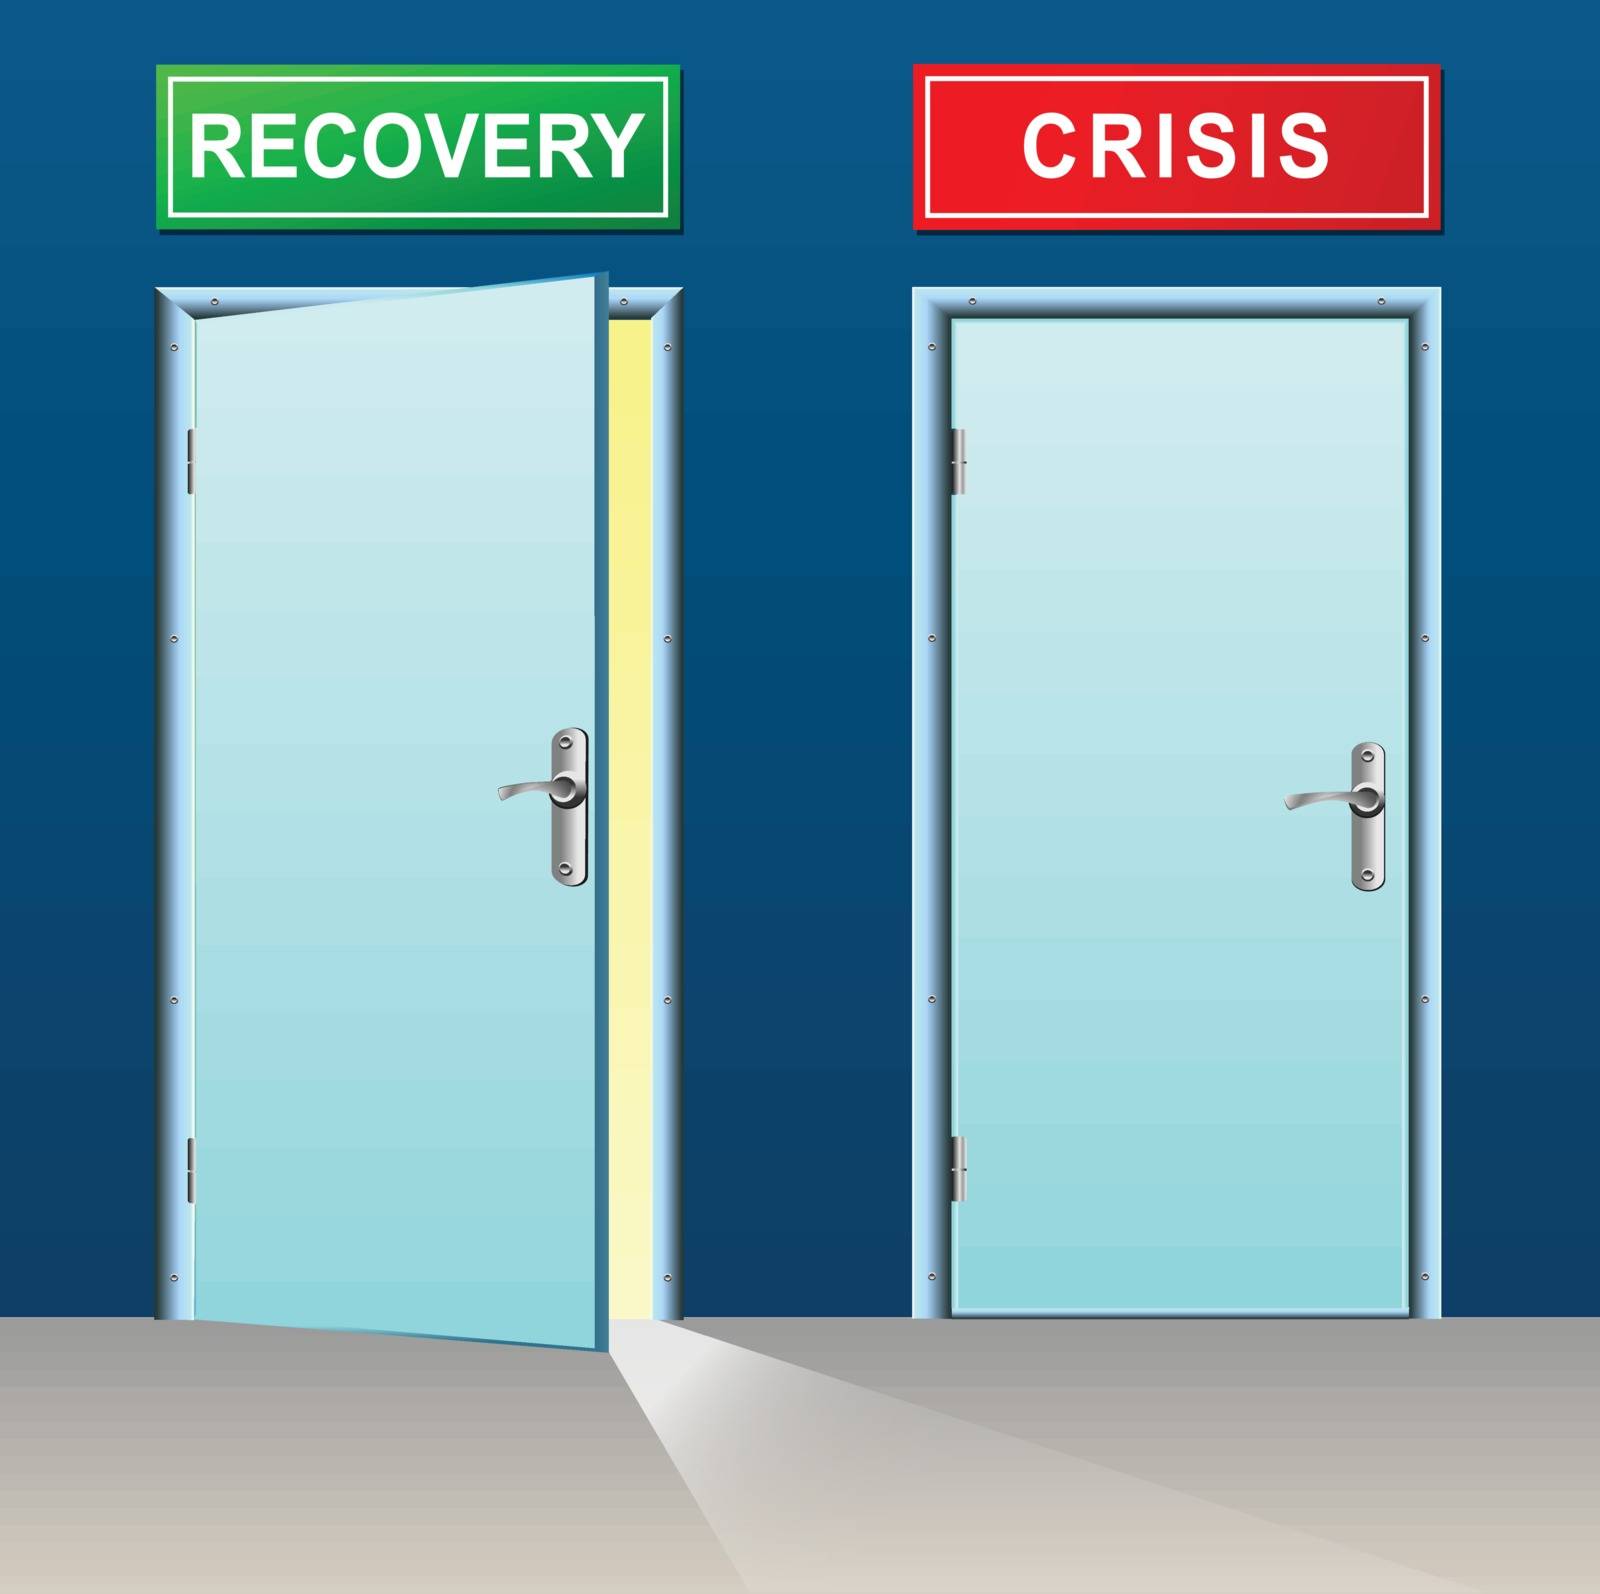 illustration of recovery and crisis doors concept